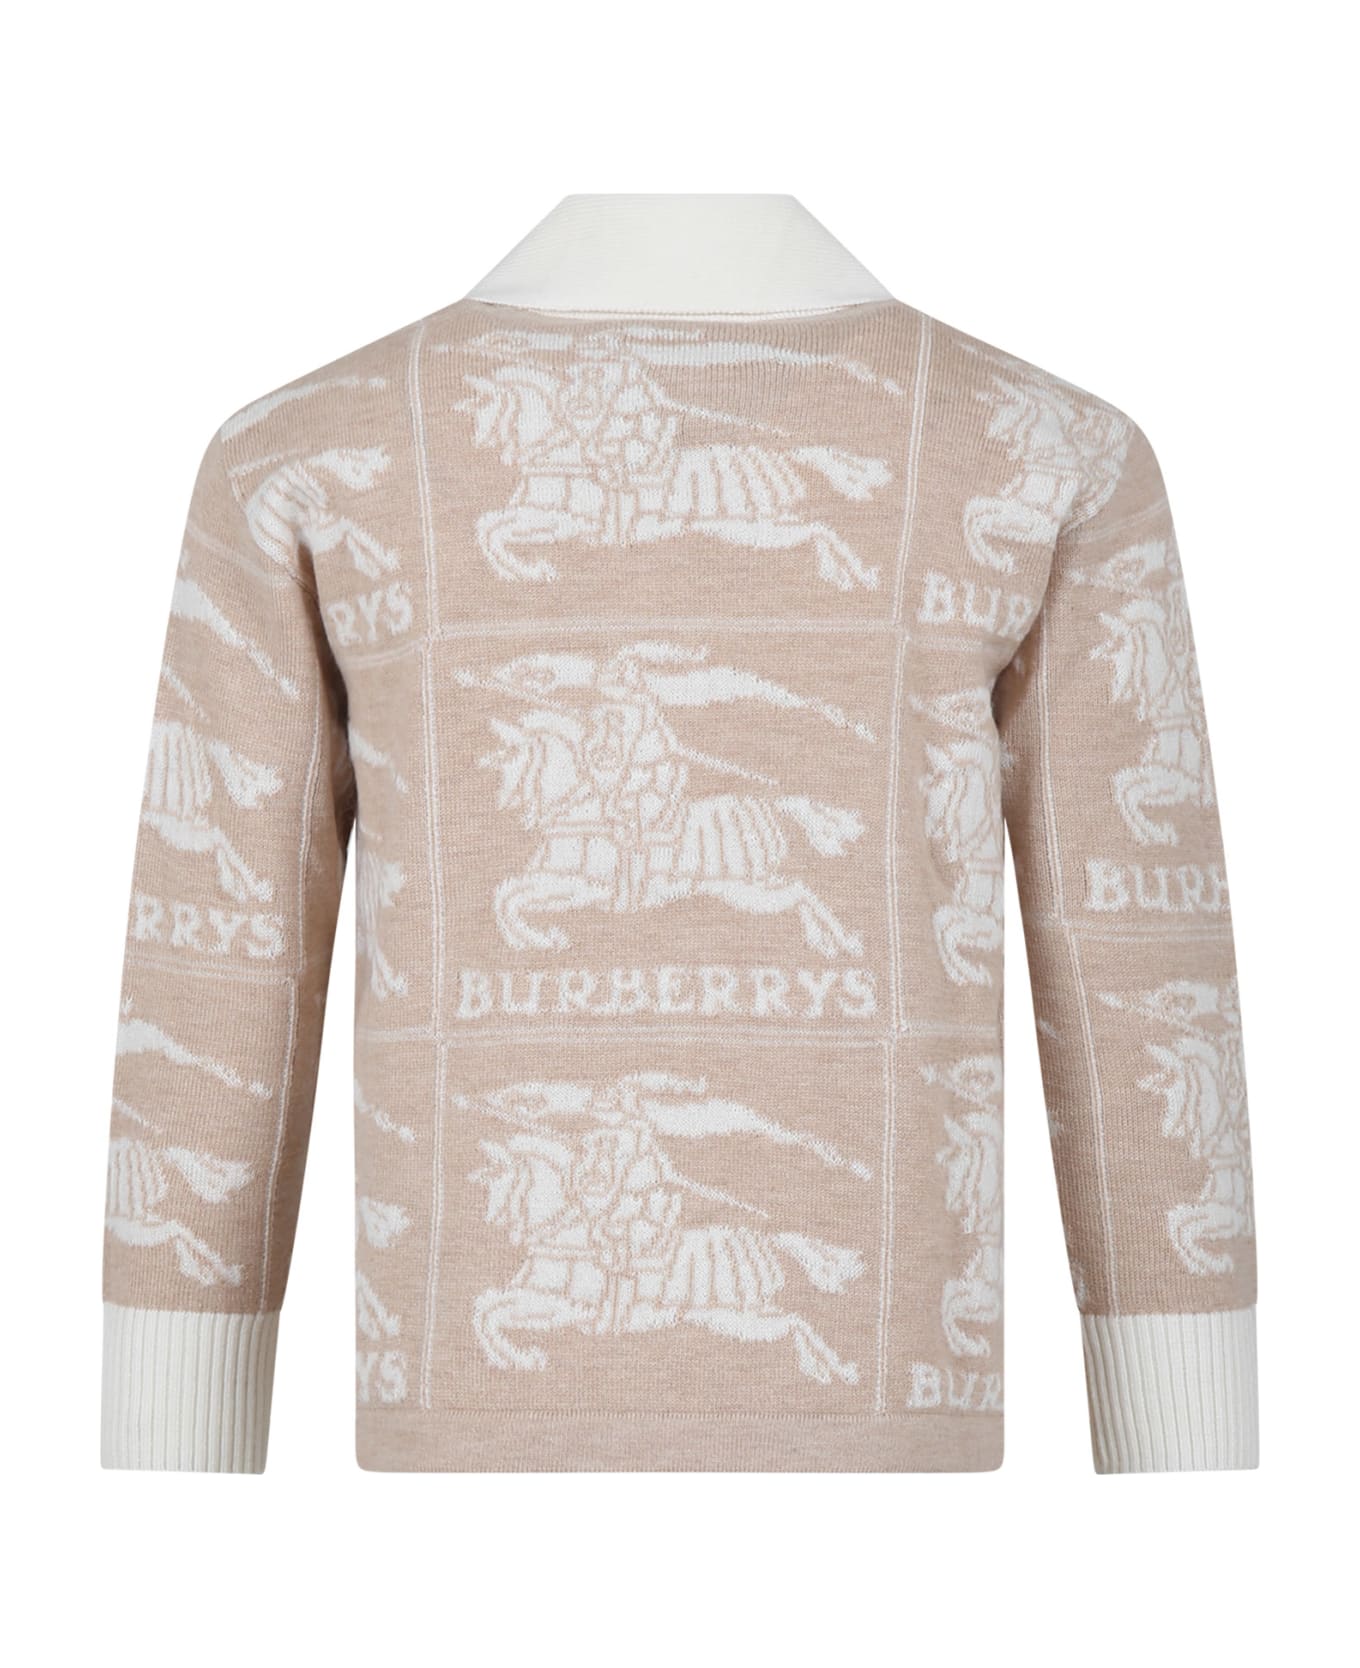 Burberry Ivory Cardigan For Girl With Iconic All-over Logo - Ivory